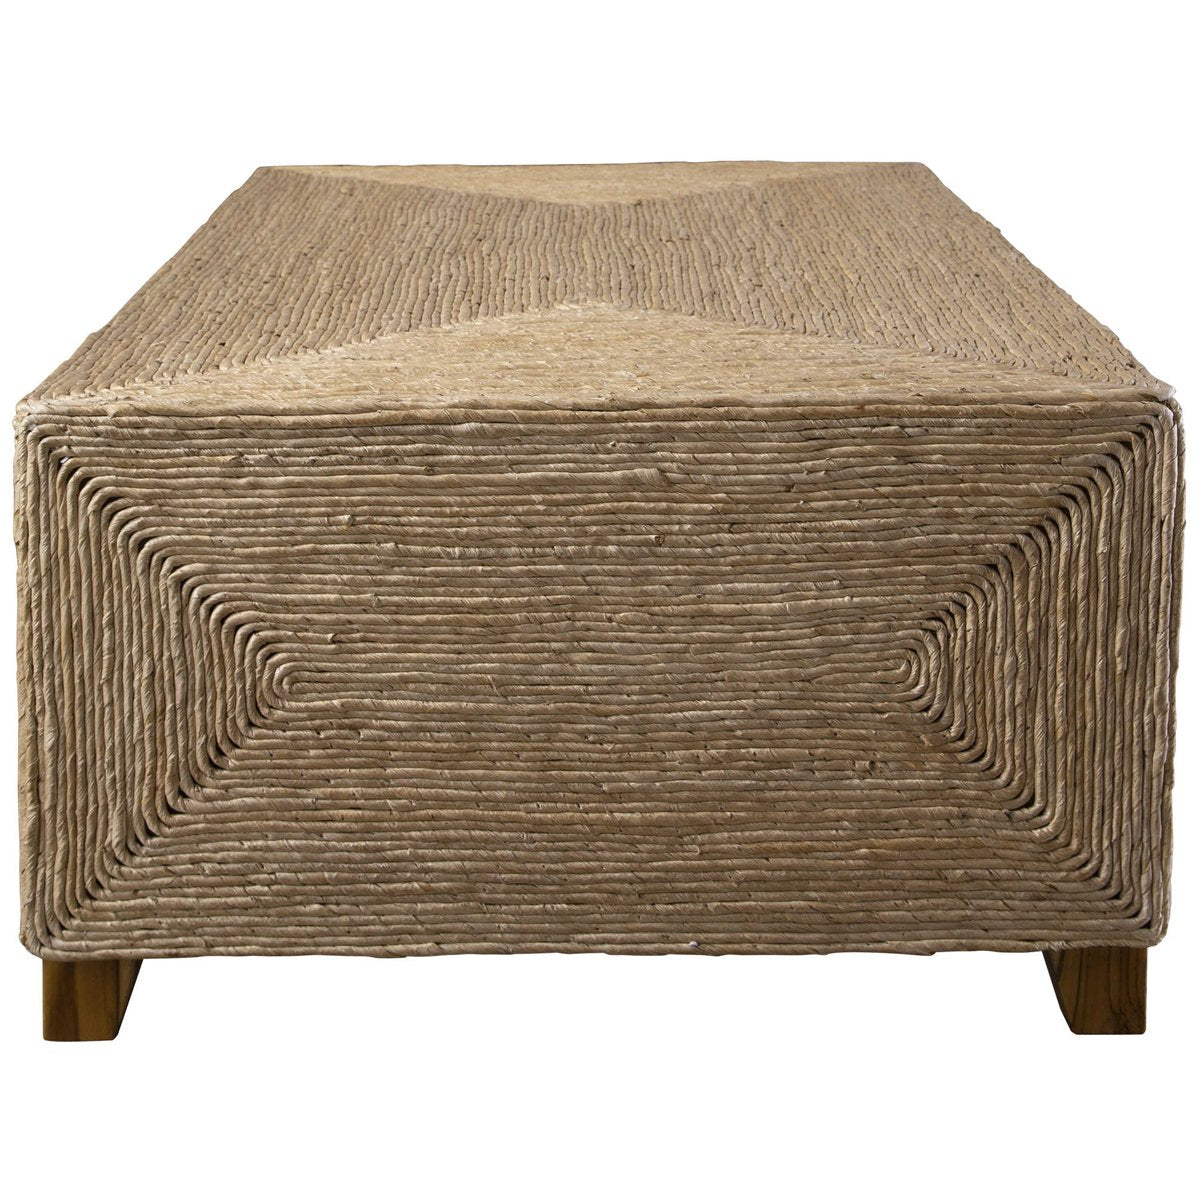 Uttermost Rora Woven Coffee Table